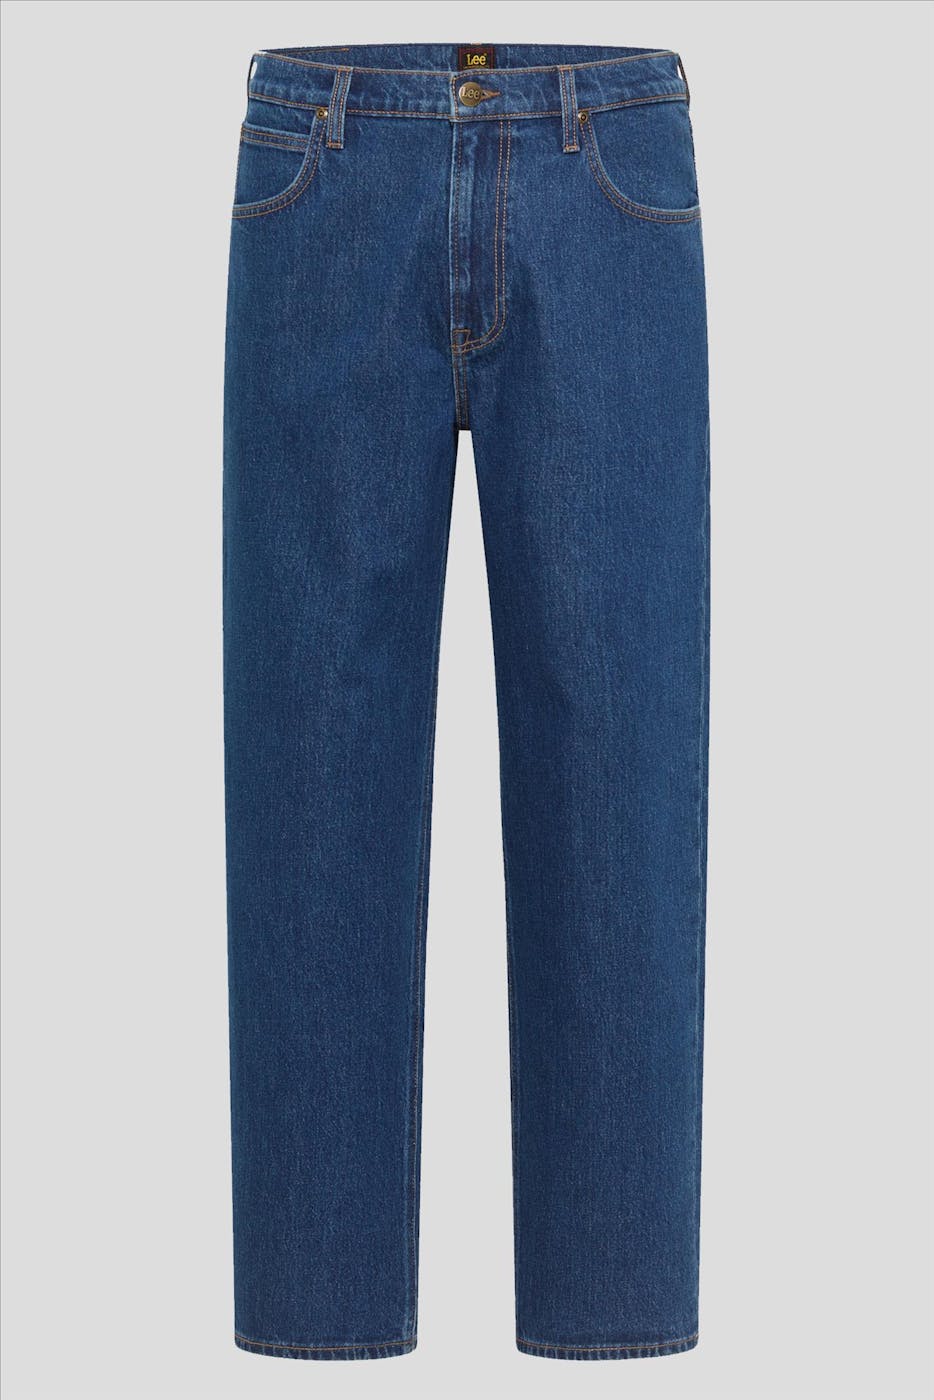 Lee - Donkerblauwe Asher Loose Straight jeans